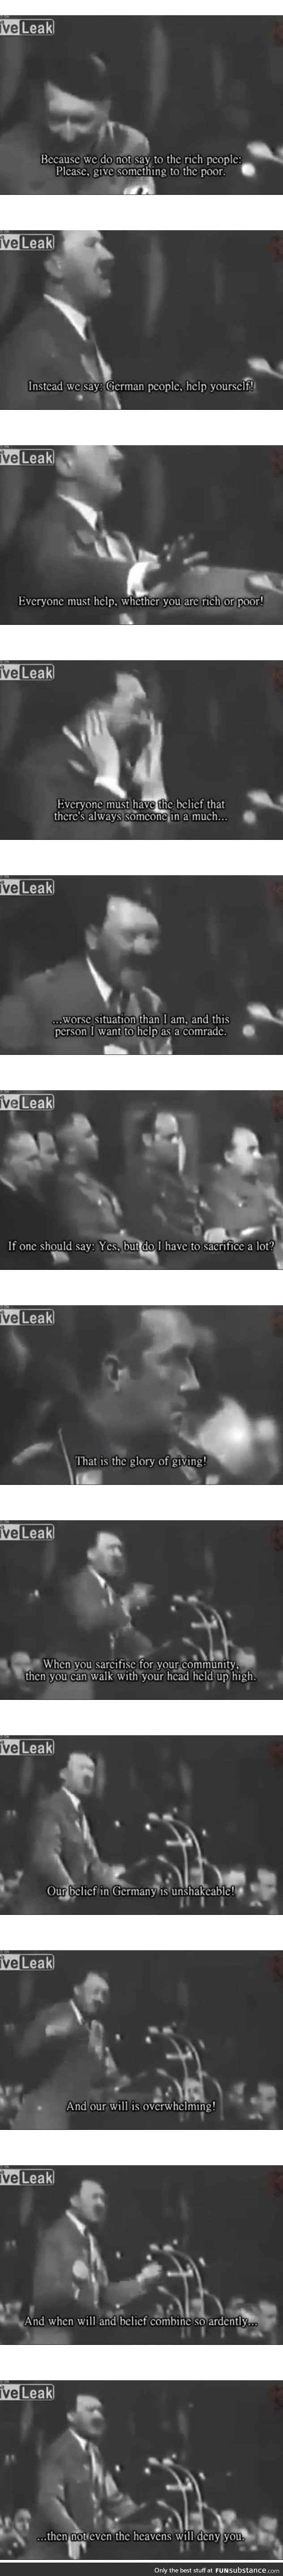 Hitler did say some great things